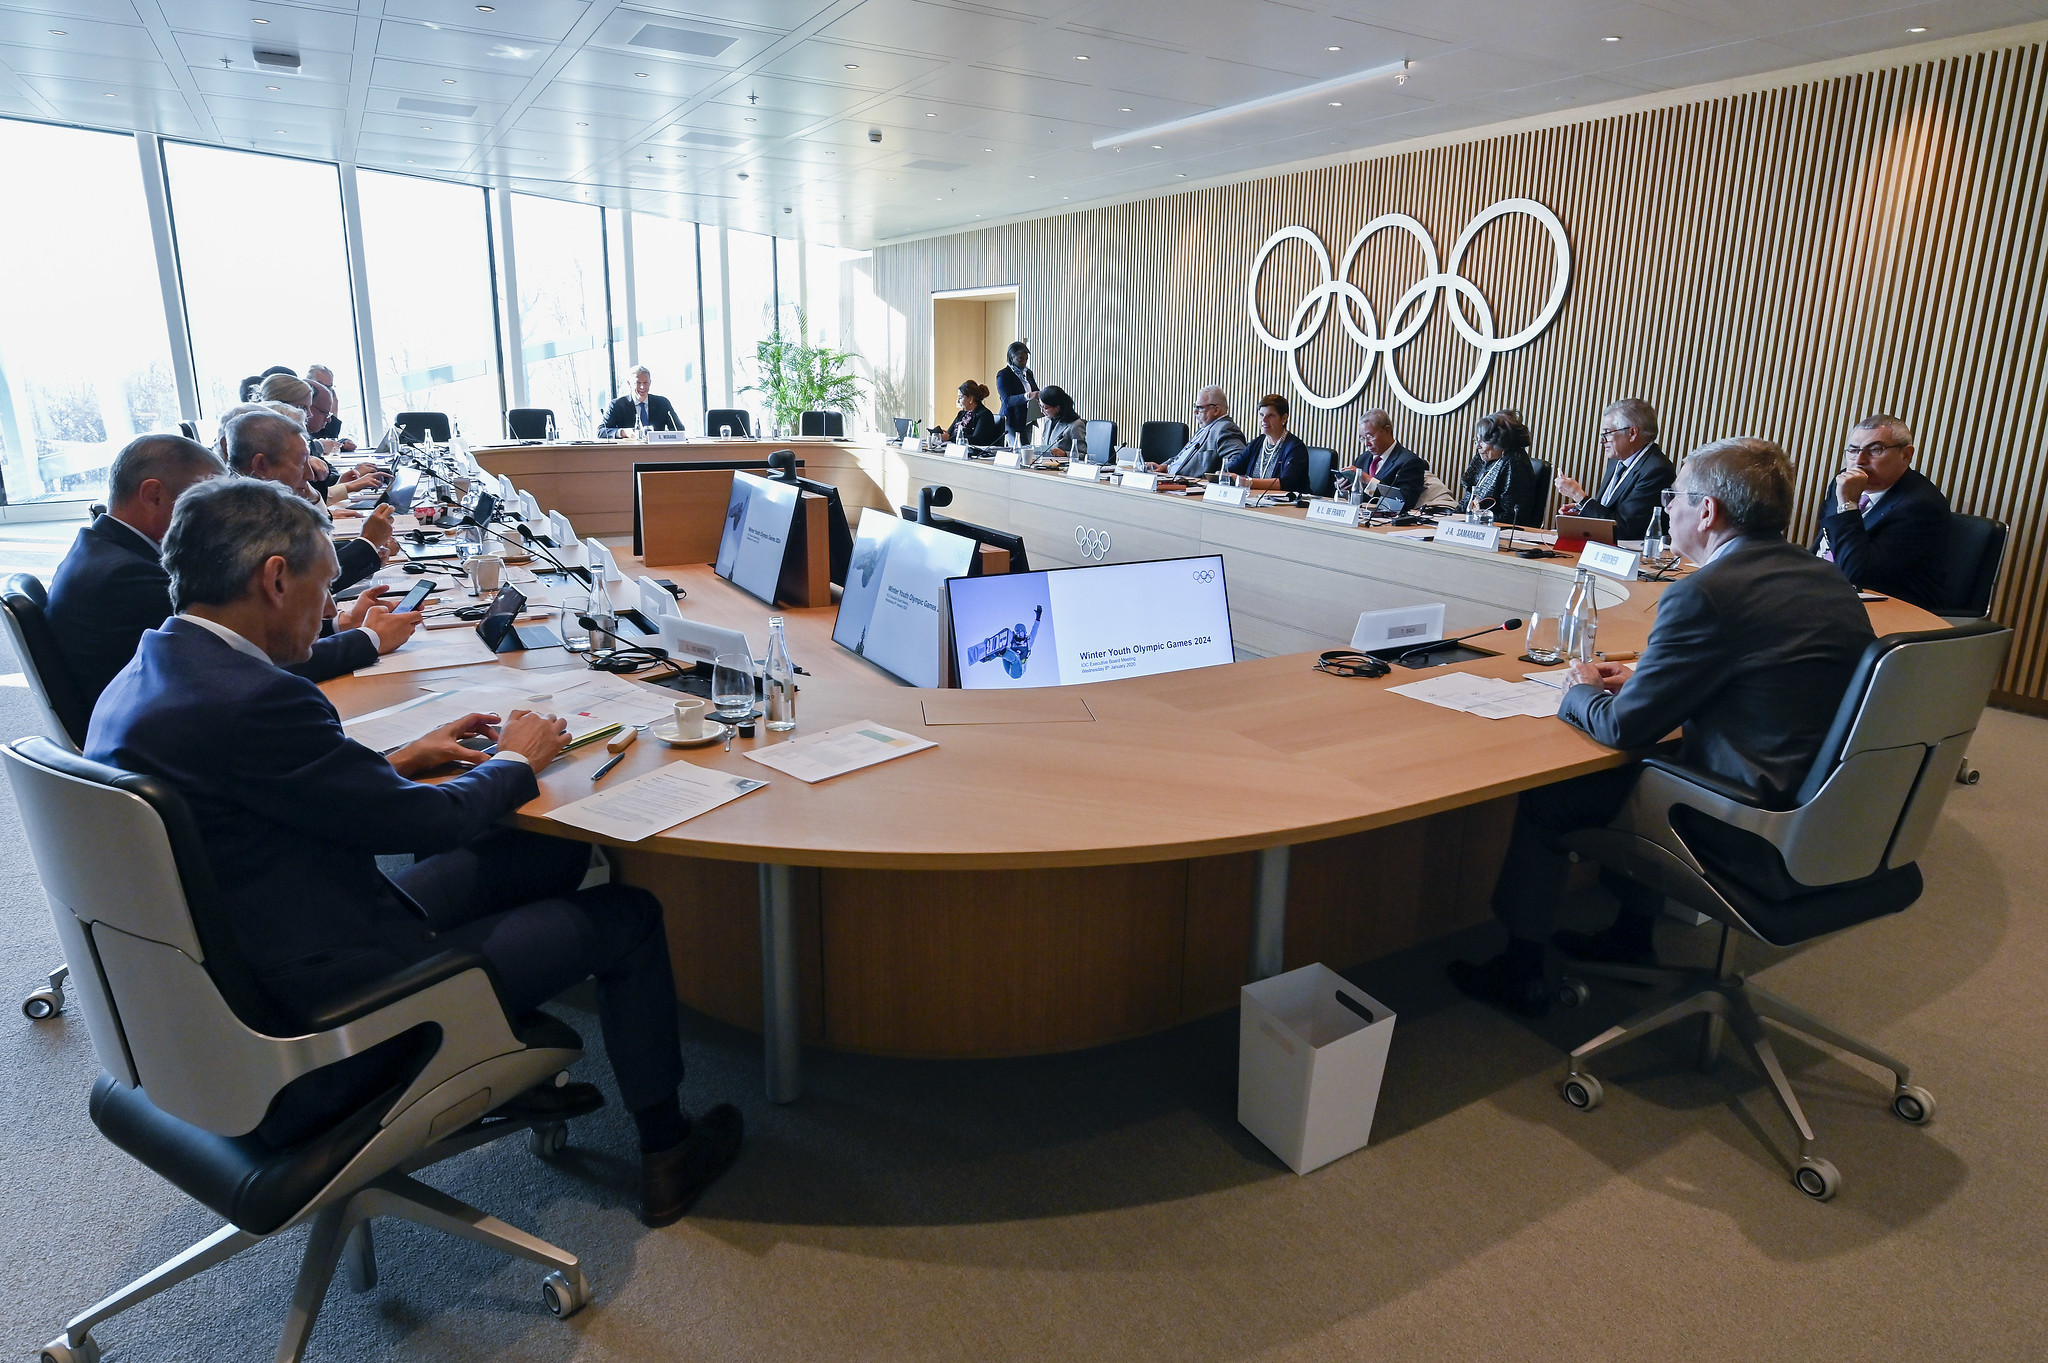 The Future Host Commission recommended Gangwon Province as the host of the 2024 Winter Youth Olympics to the Executive Board ©IOC